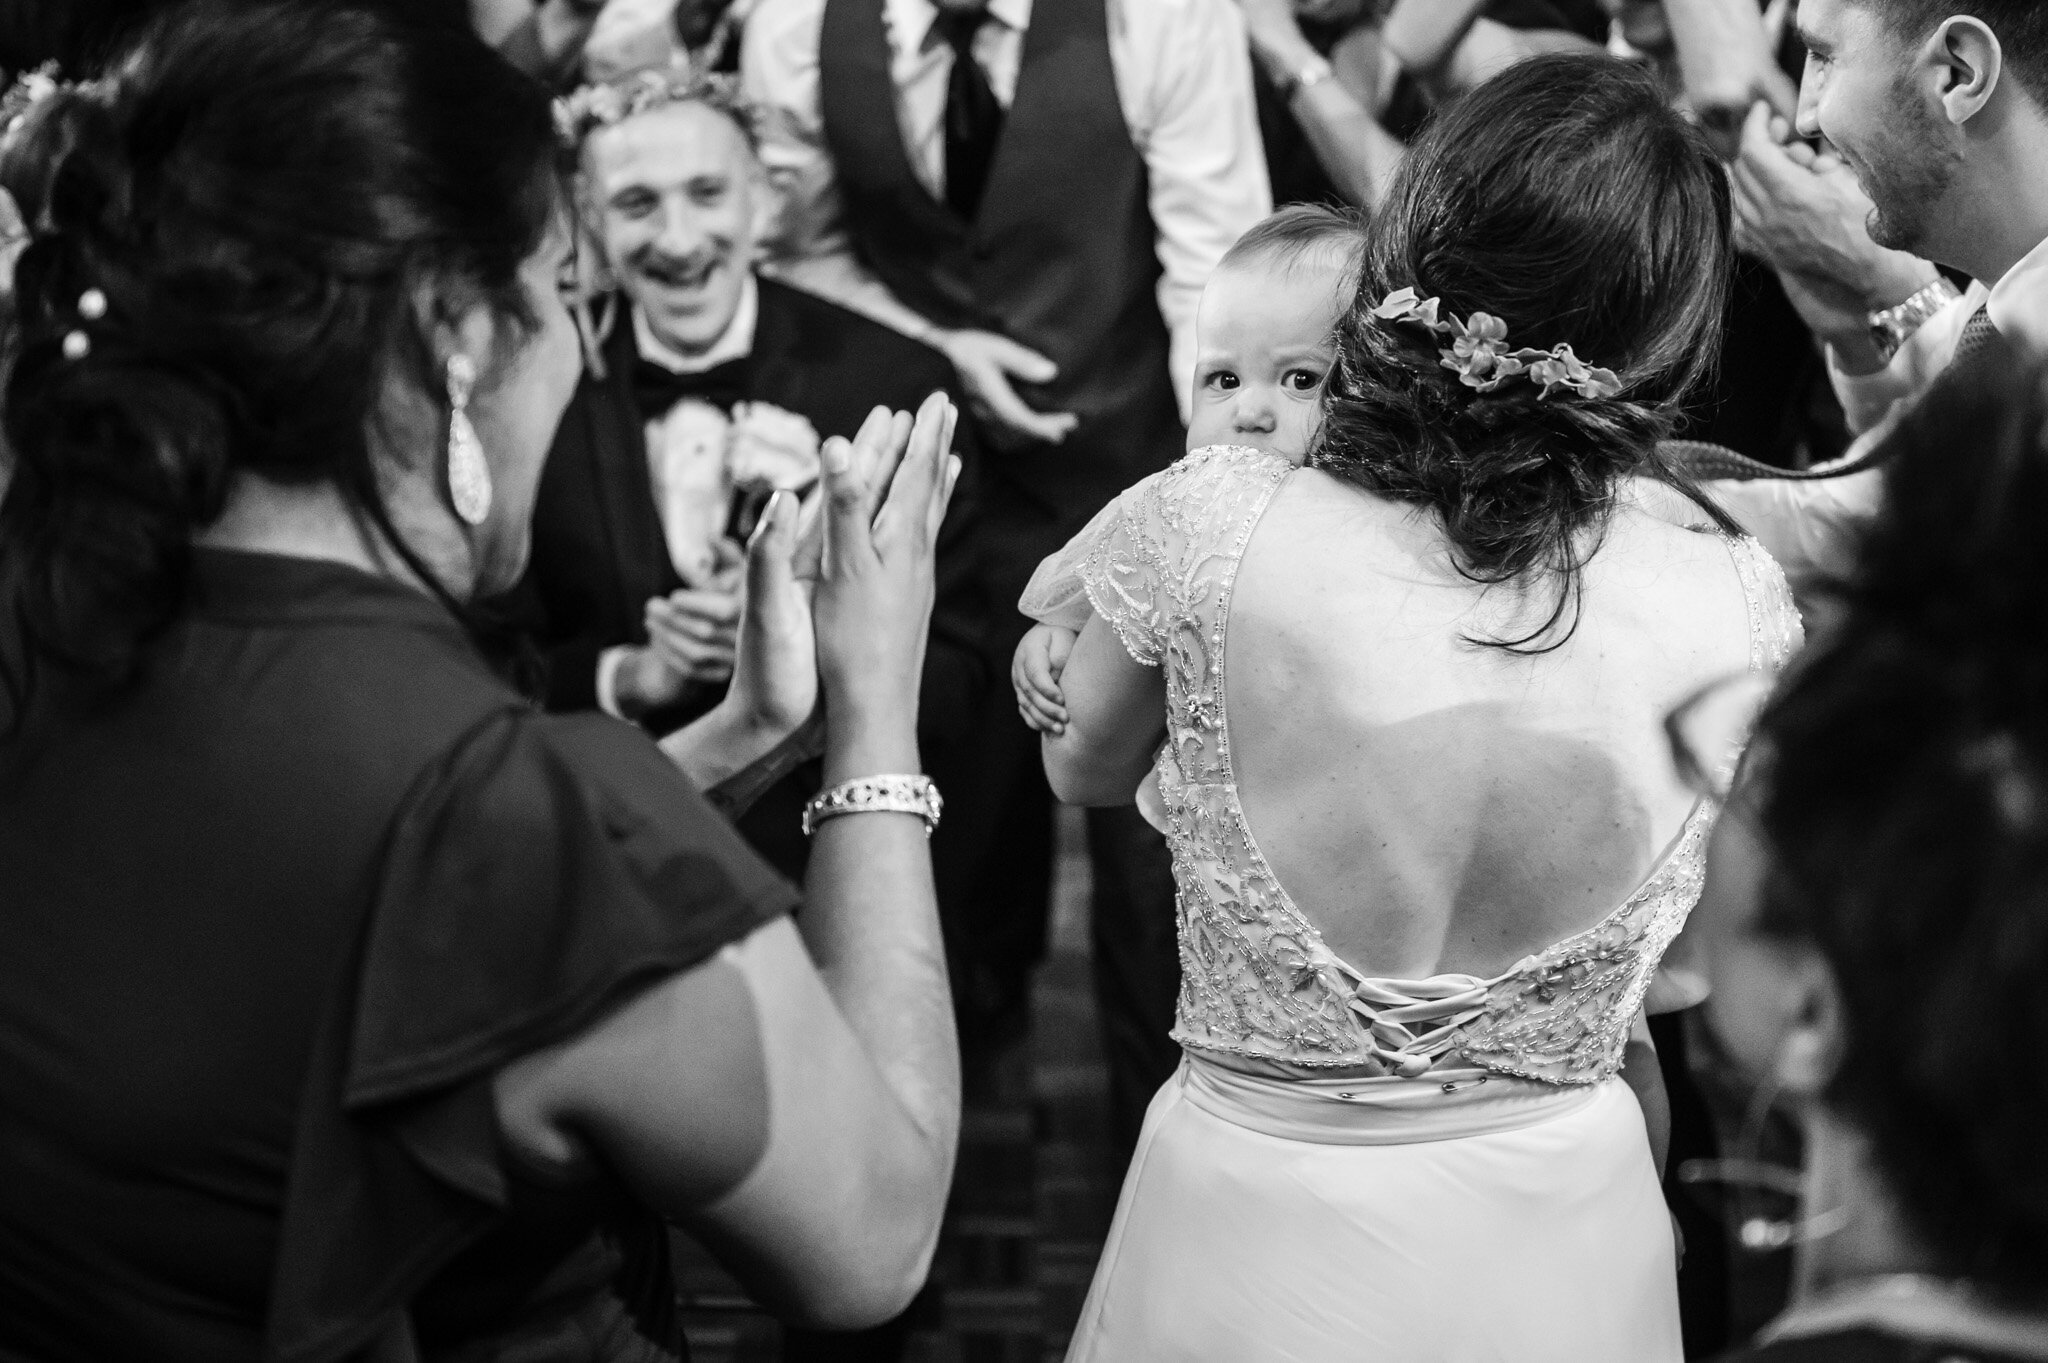 The bride dancing with a small child at her wedding reception